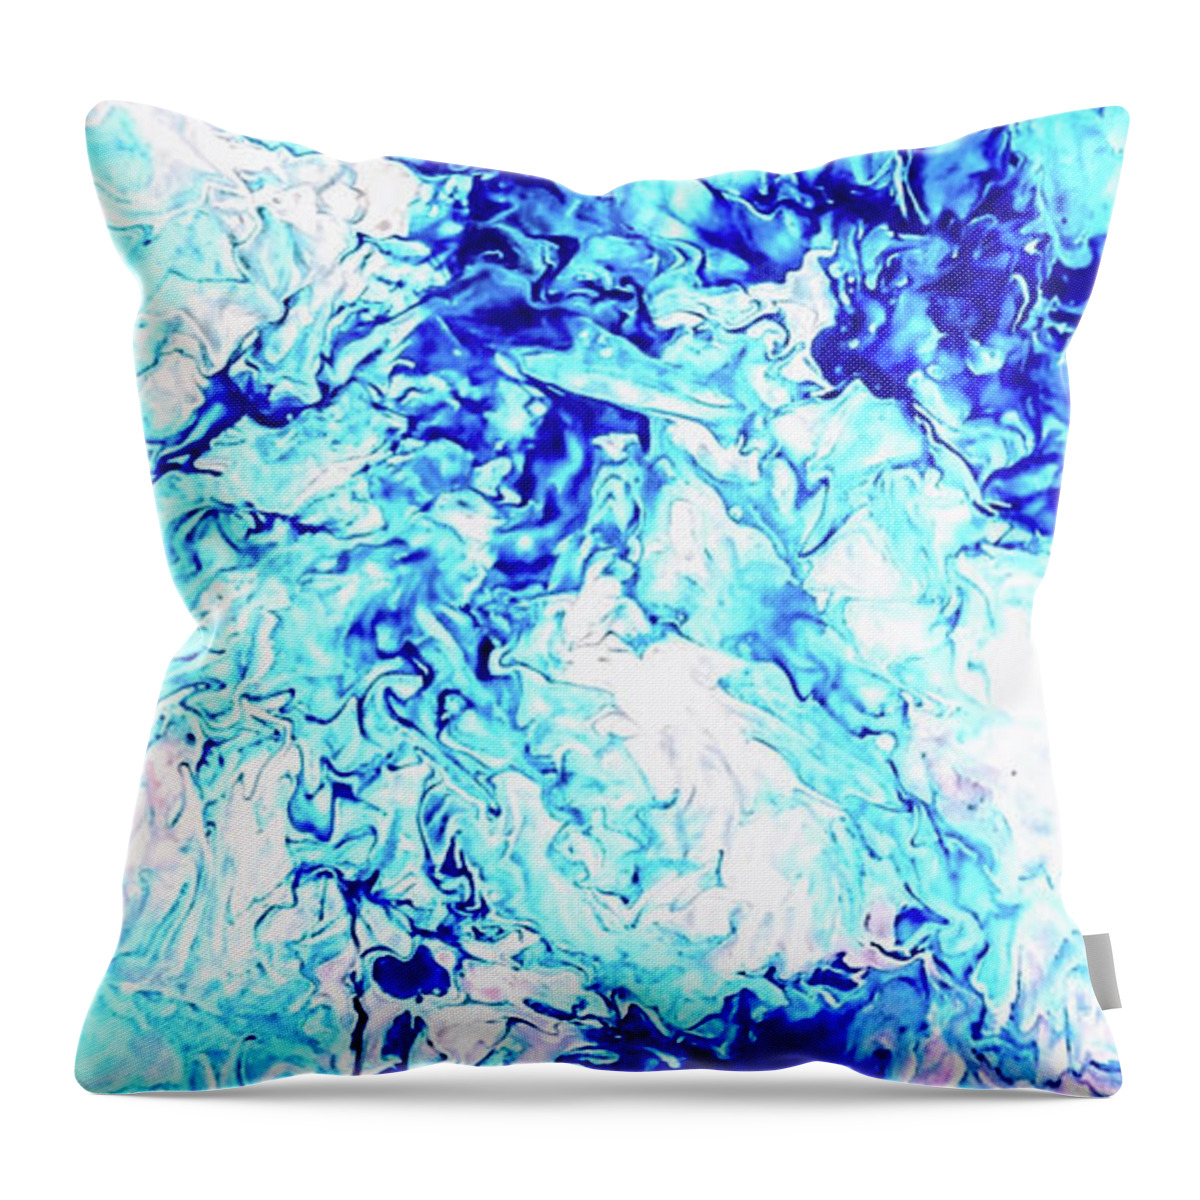 Blue Water Throw Pillow featuring the painting Blue Showers by Anna Adams